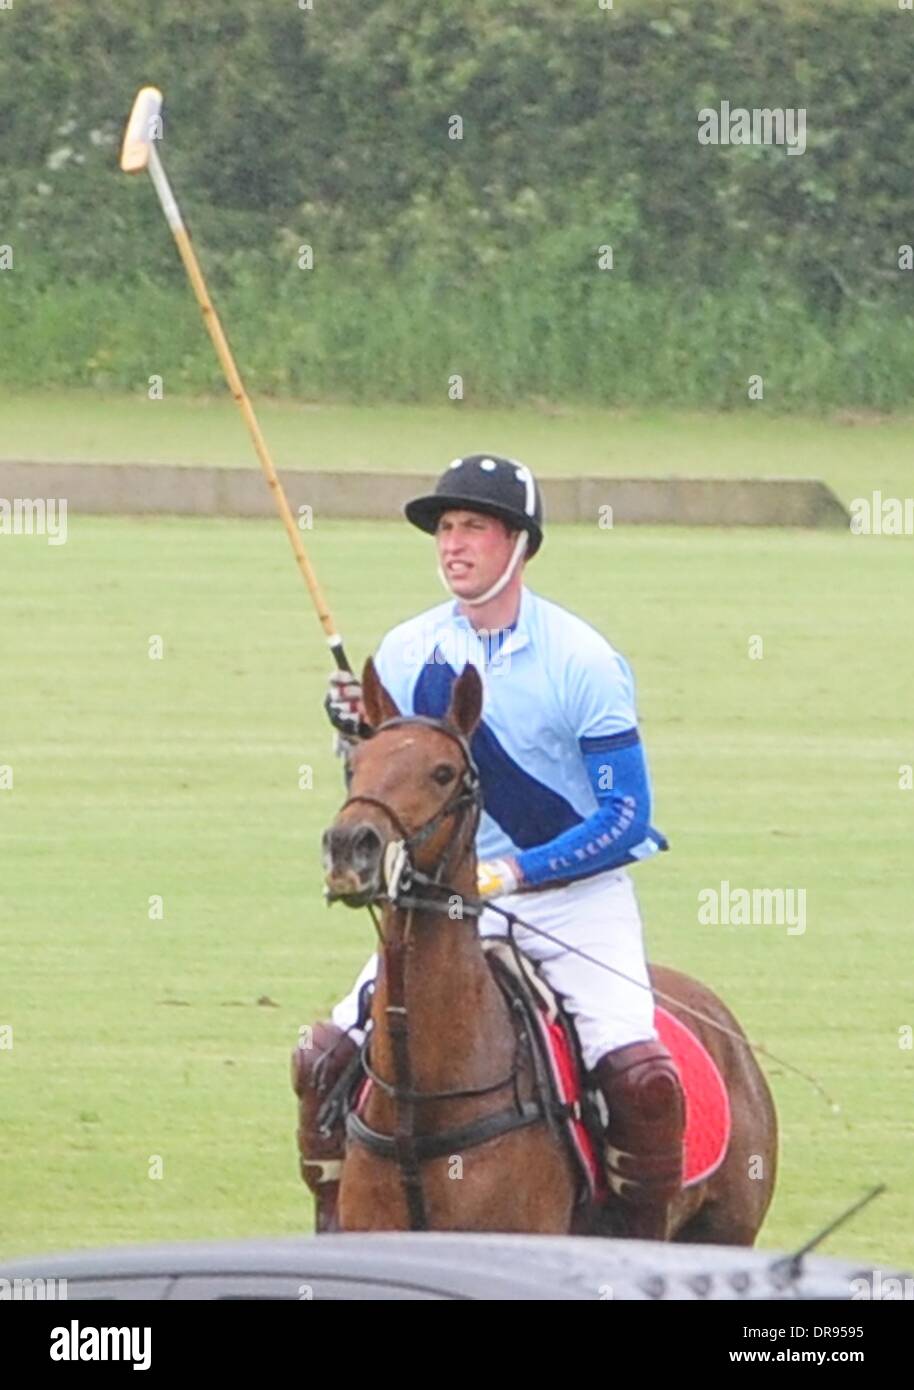 Prince William, Duke of Cambridge iis seen playing a polo match in Gloucester Gloucestershire, England - 16.06.12 Stock Photo